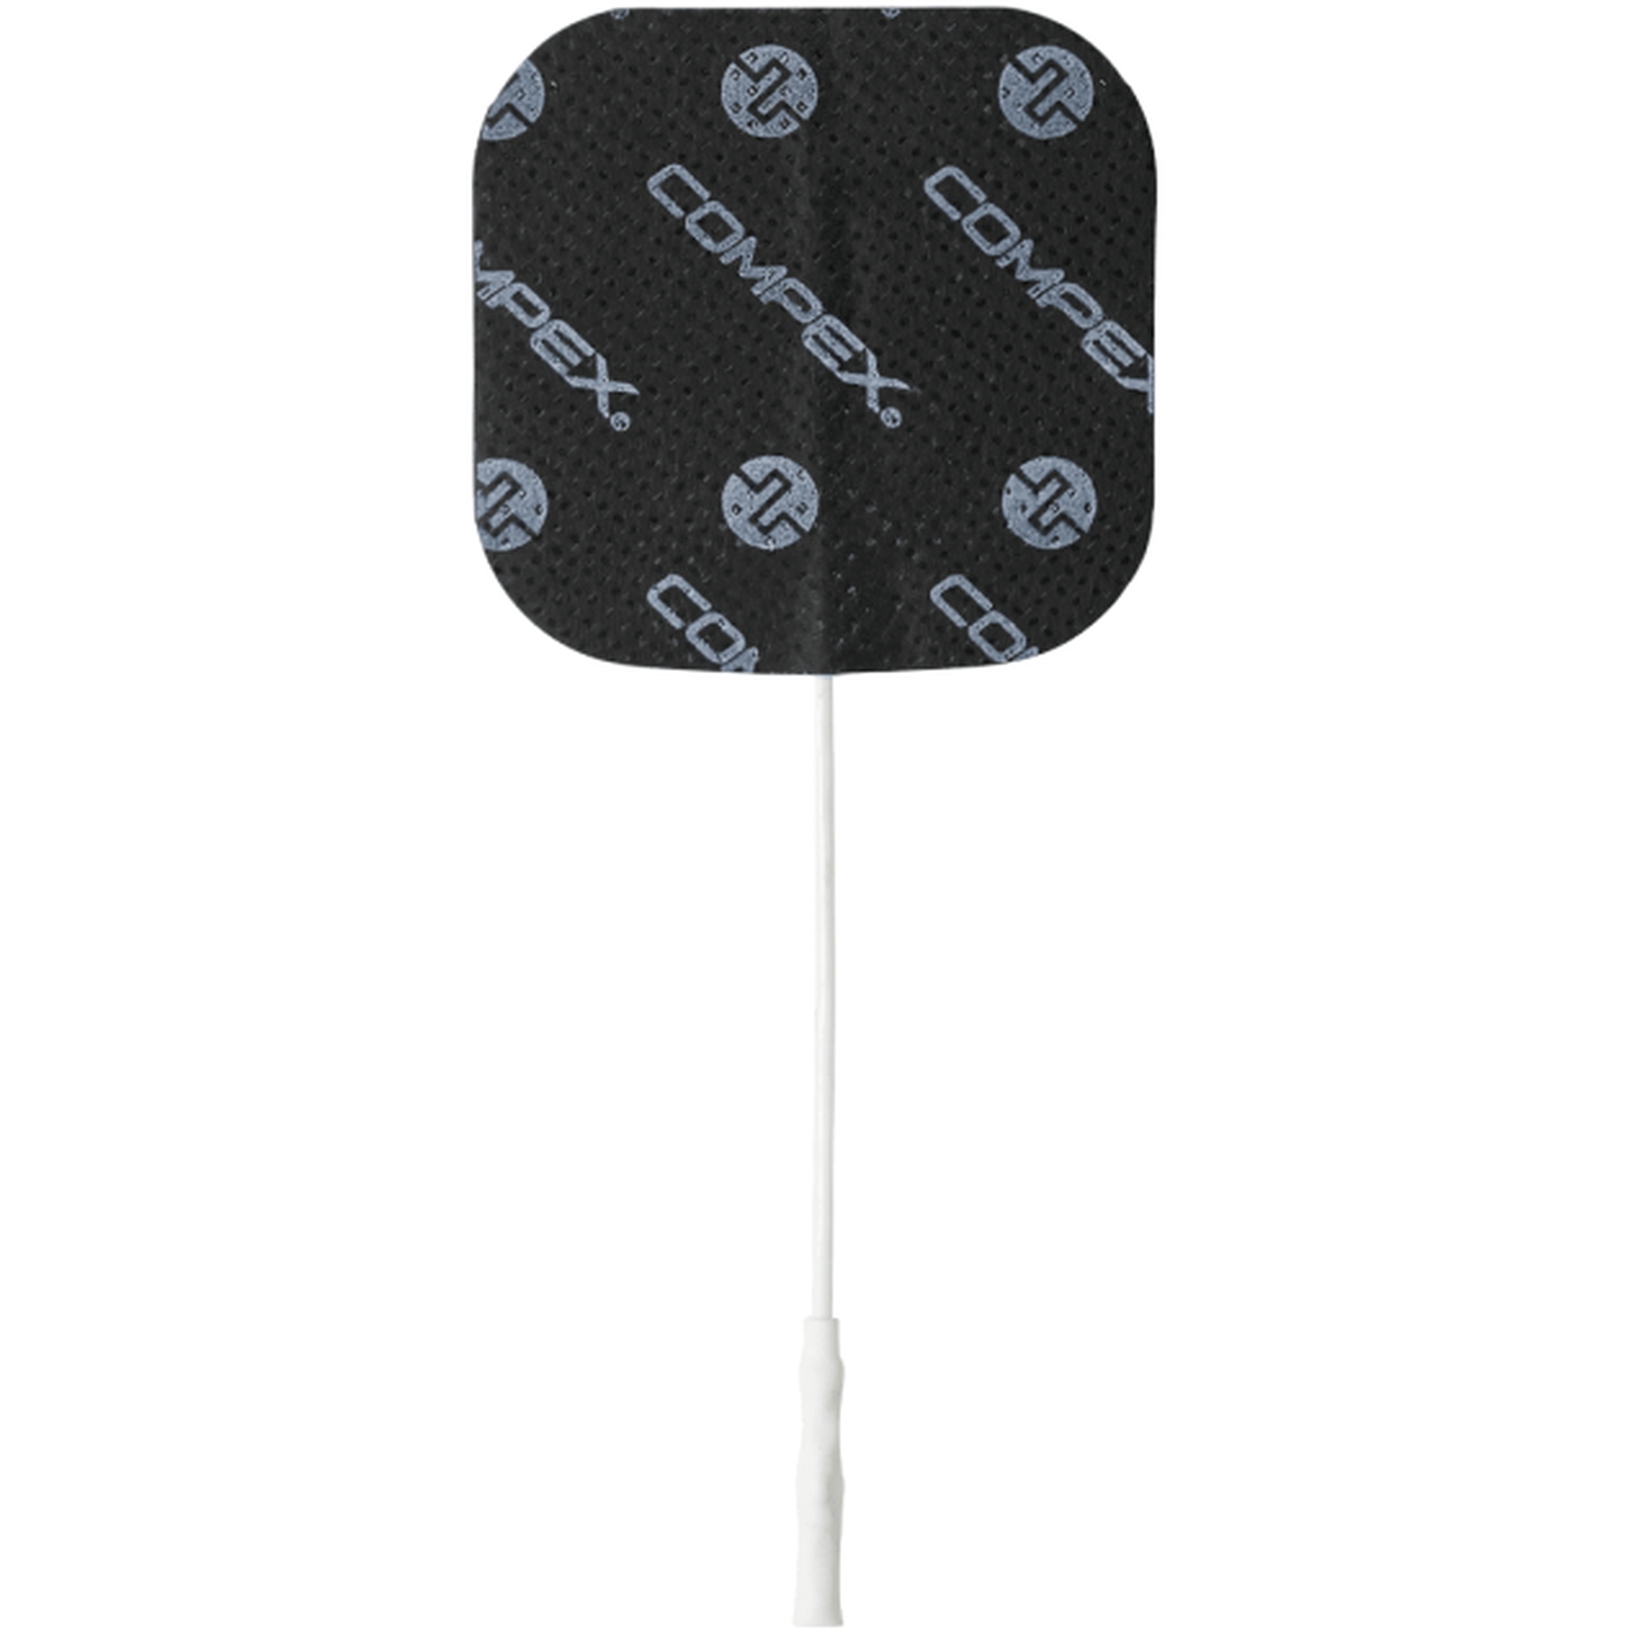 Image of Compex Performance Electrodes 50 x 50mm Pin - 4pcs.